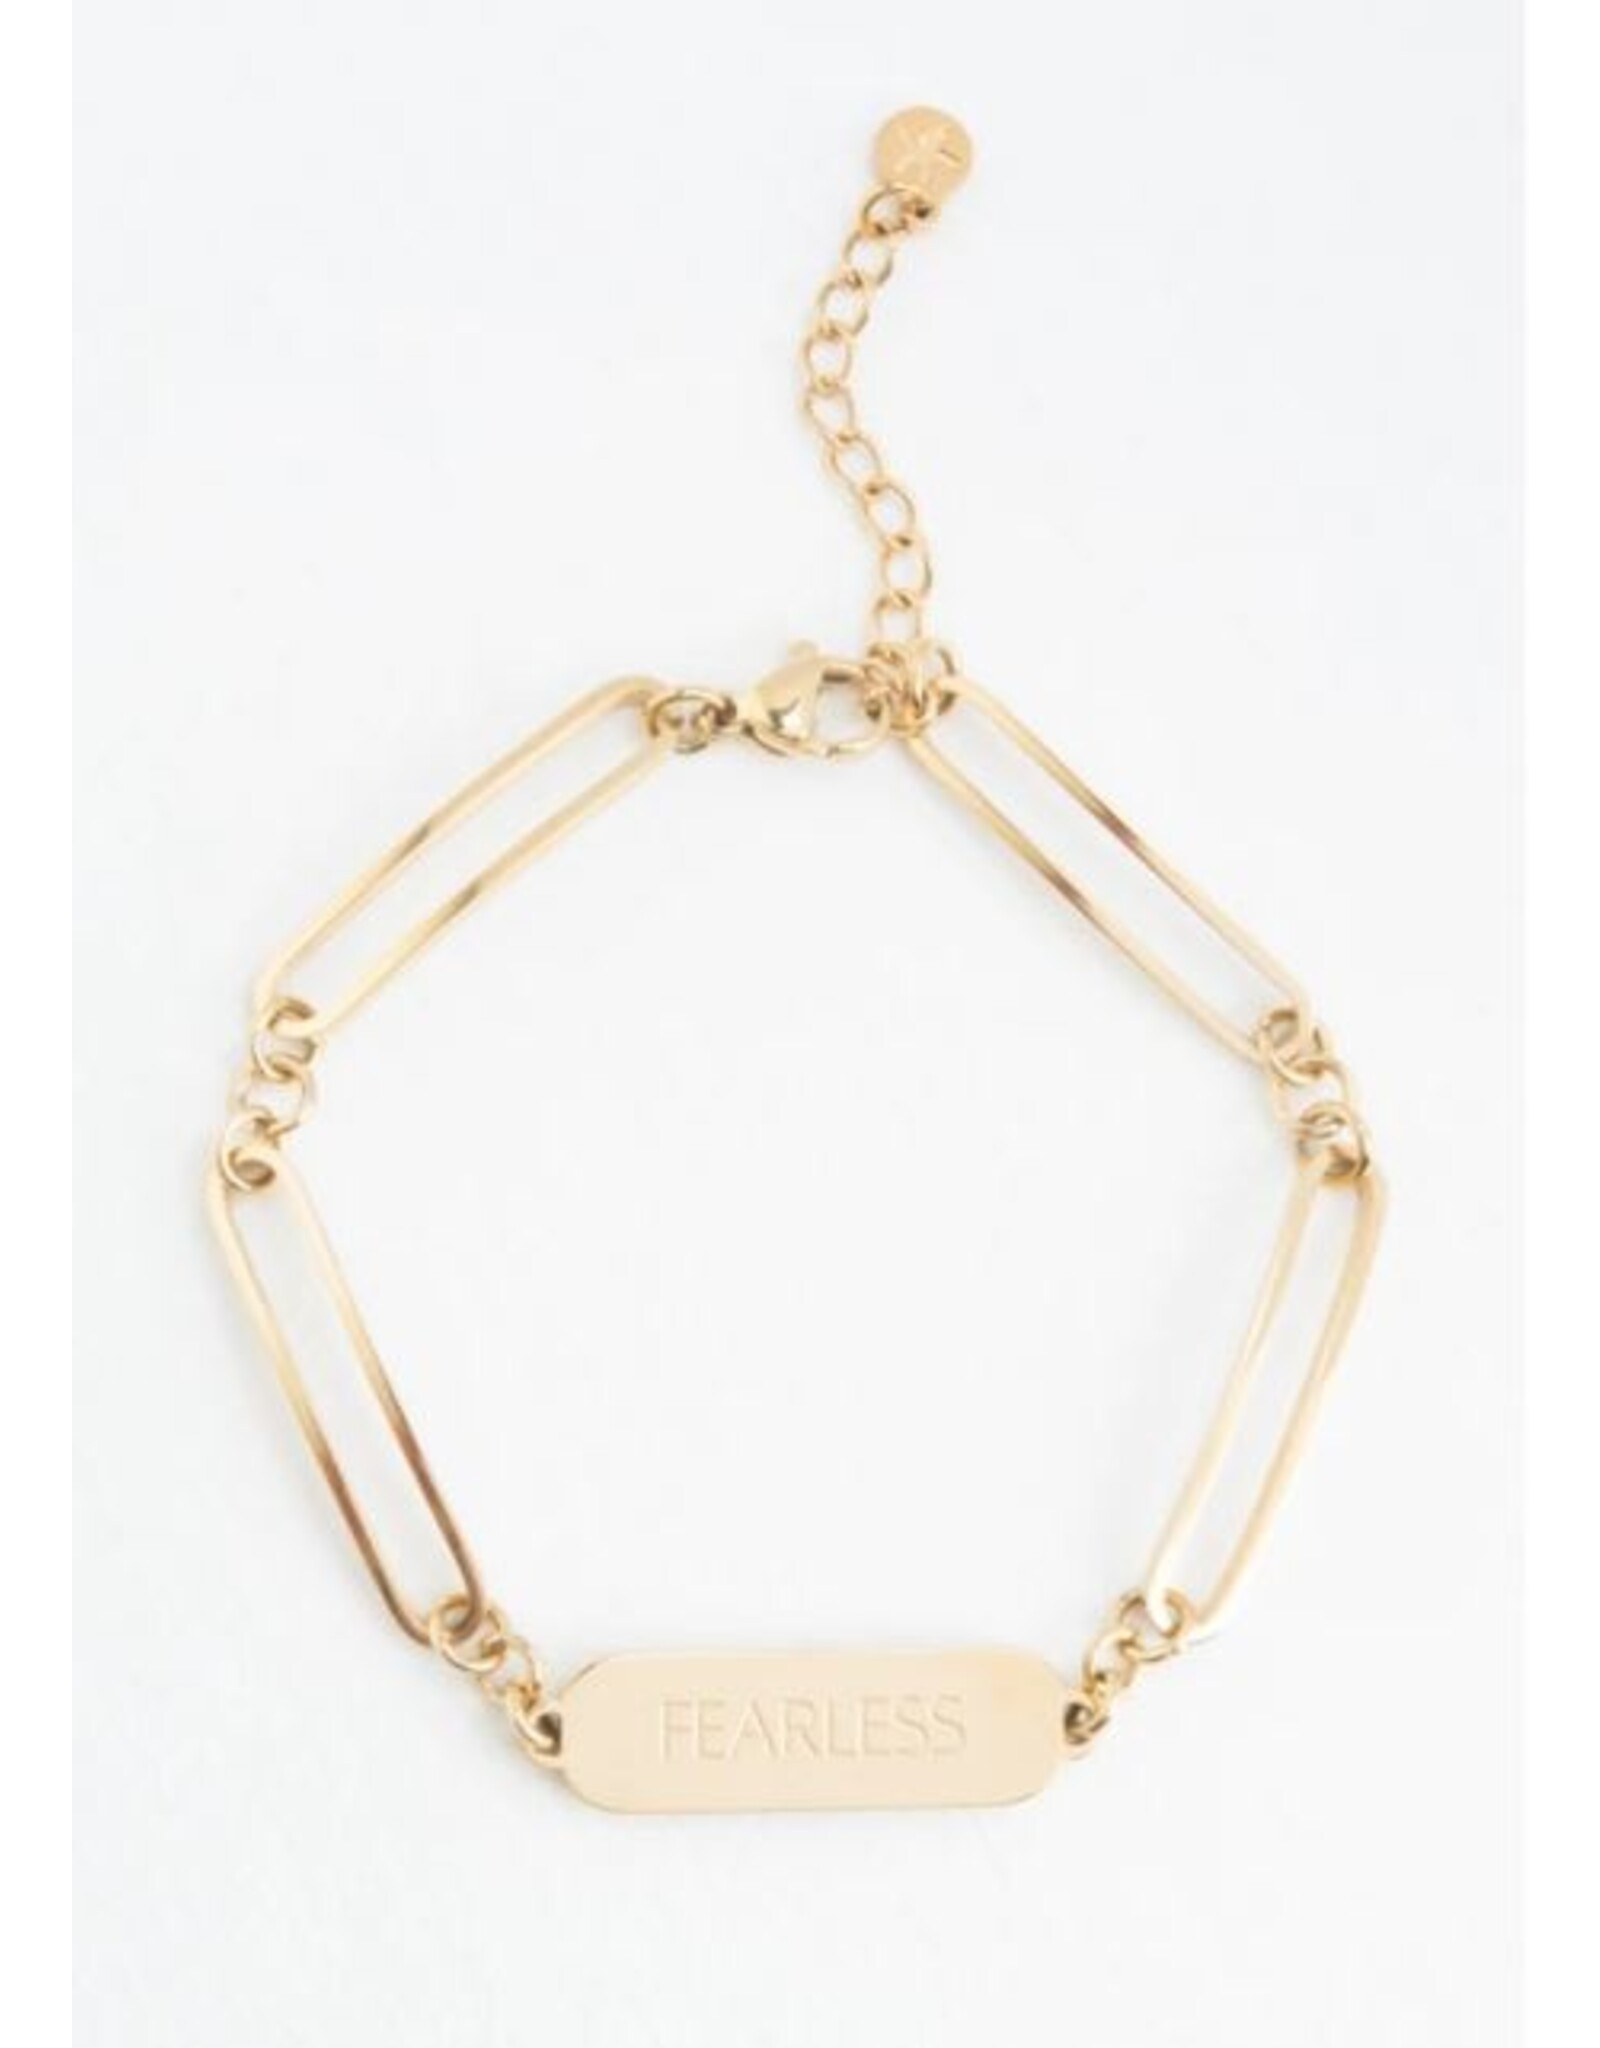 China Fearless Gold Chain Bracelet, China